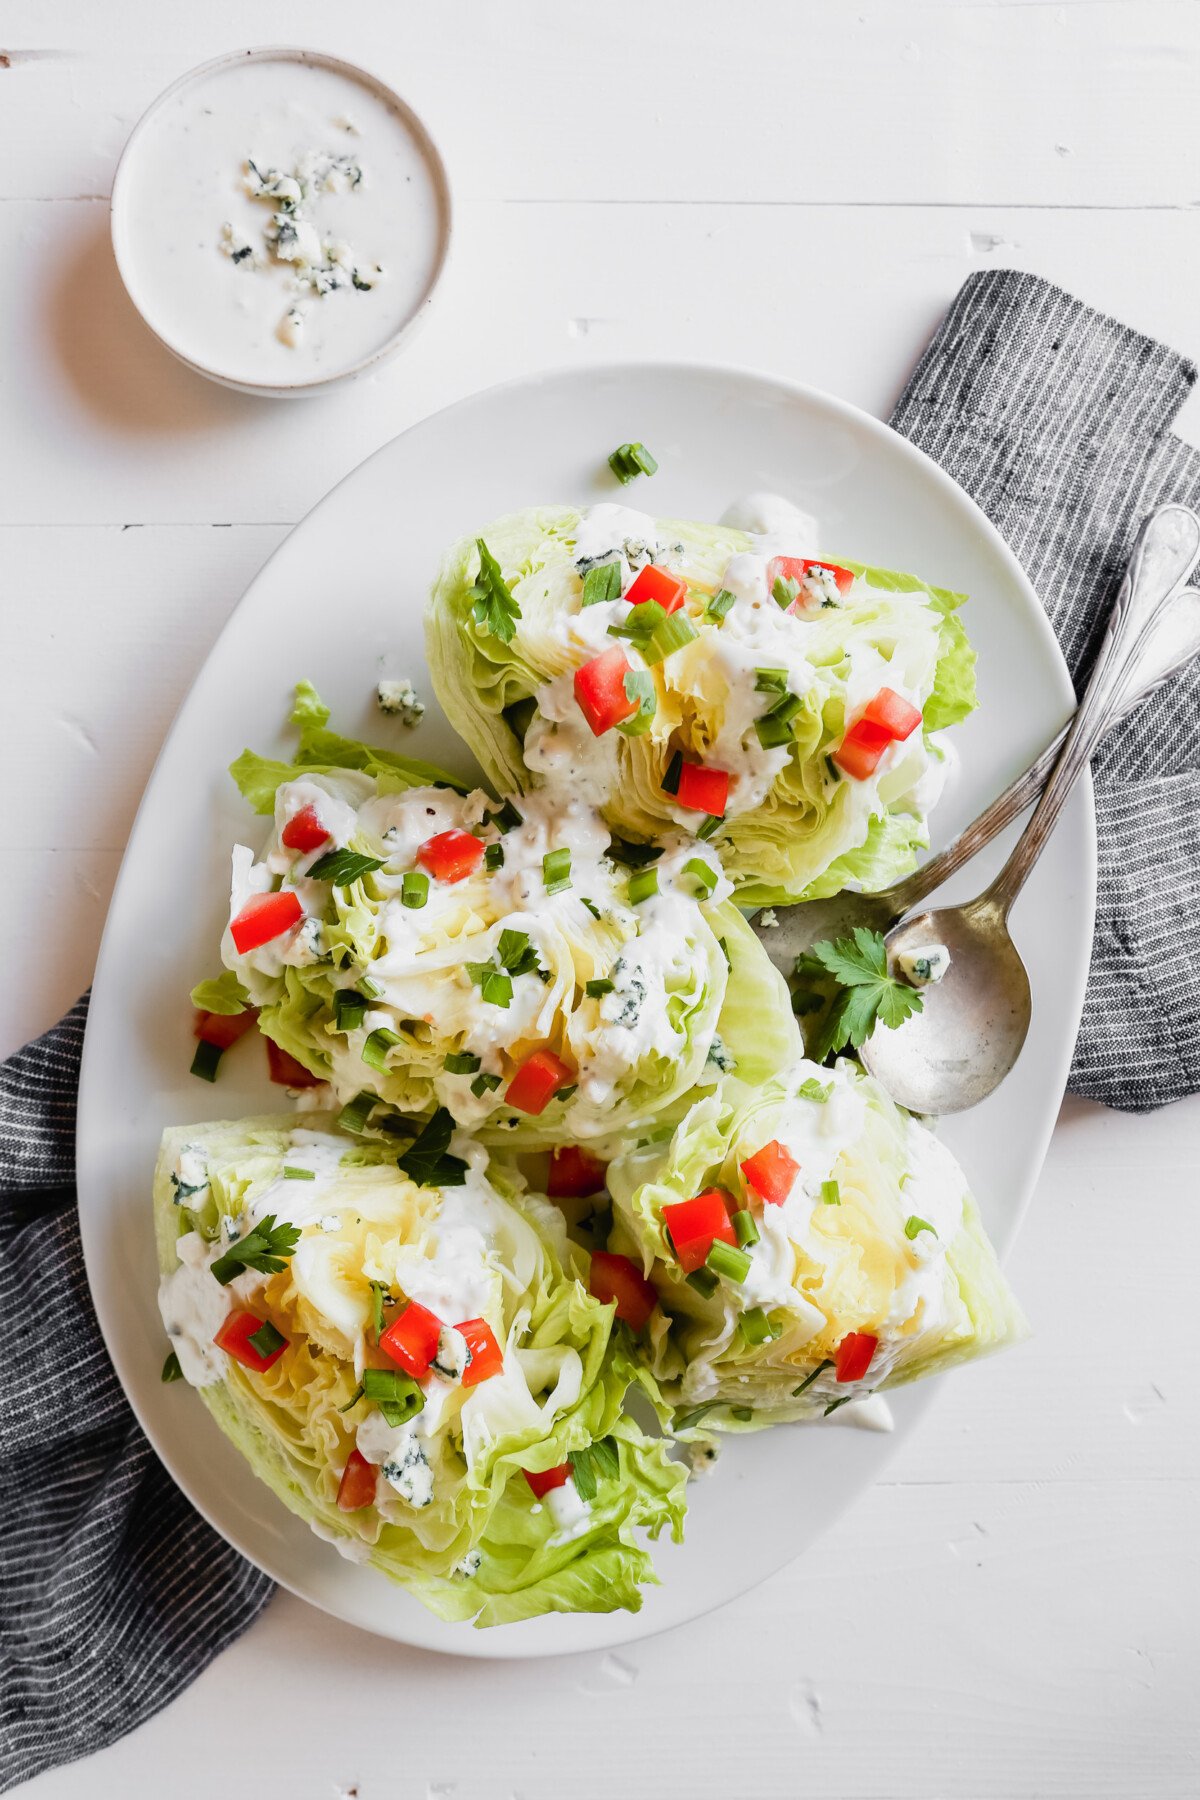 Photograph of a wedge salad with blue cheese dressing on a white plate set on a marble table